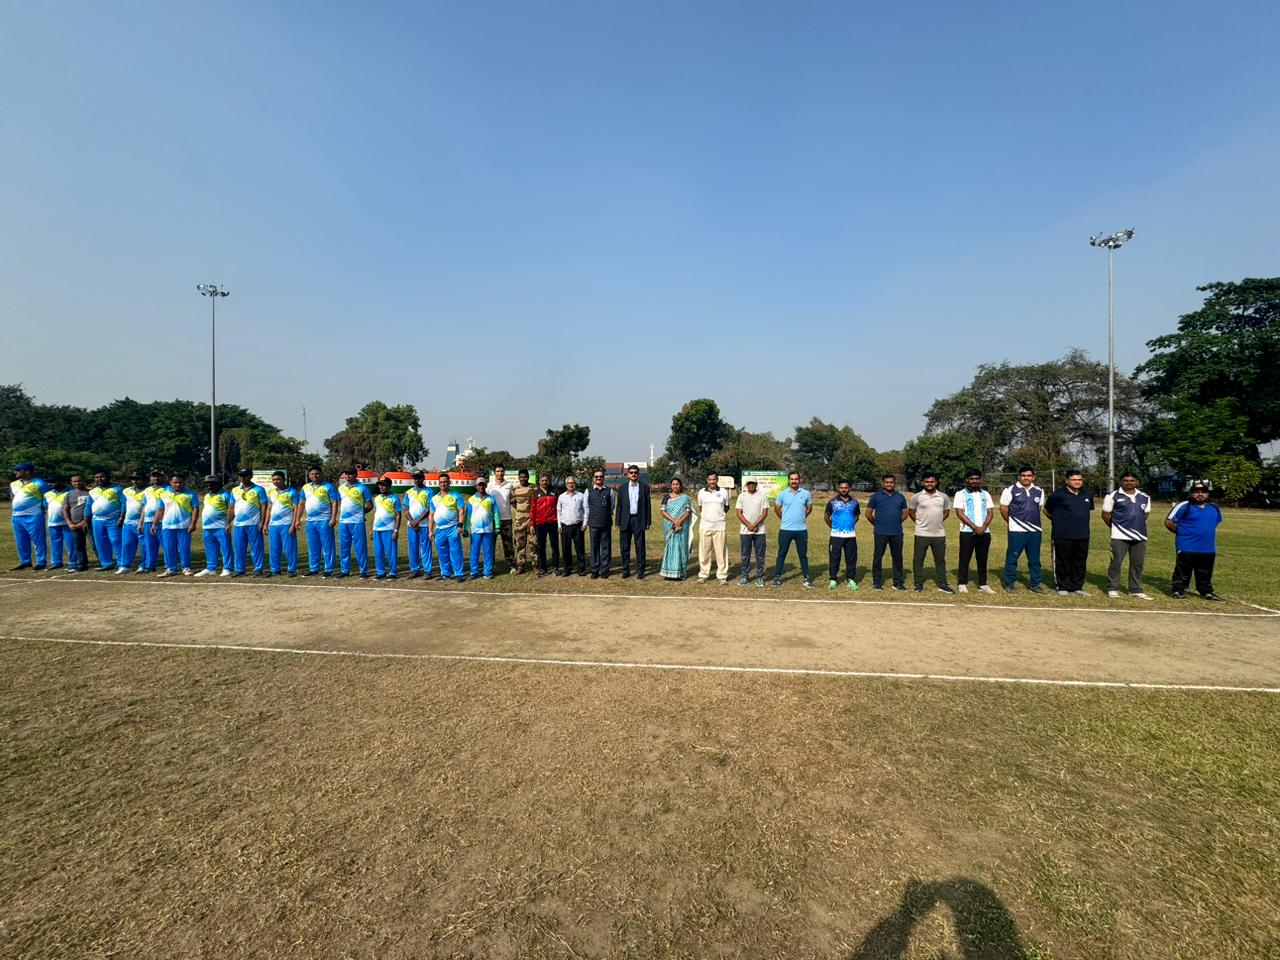 Inaugural Cricket Match between HR&A and SBS, Main Works on 11 Dec 23